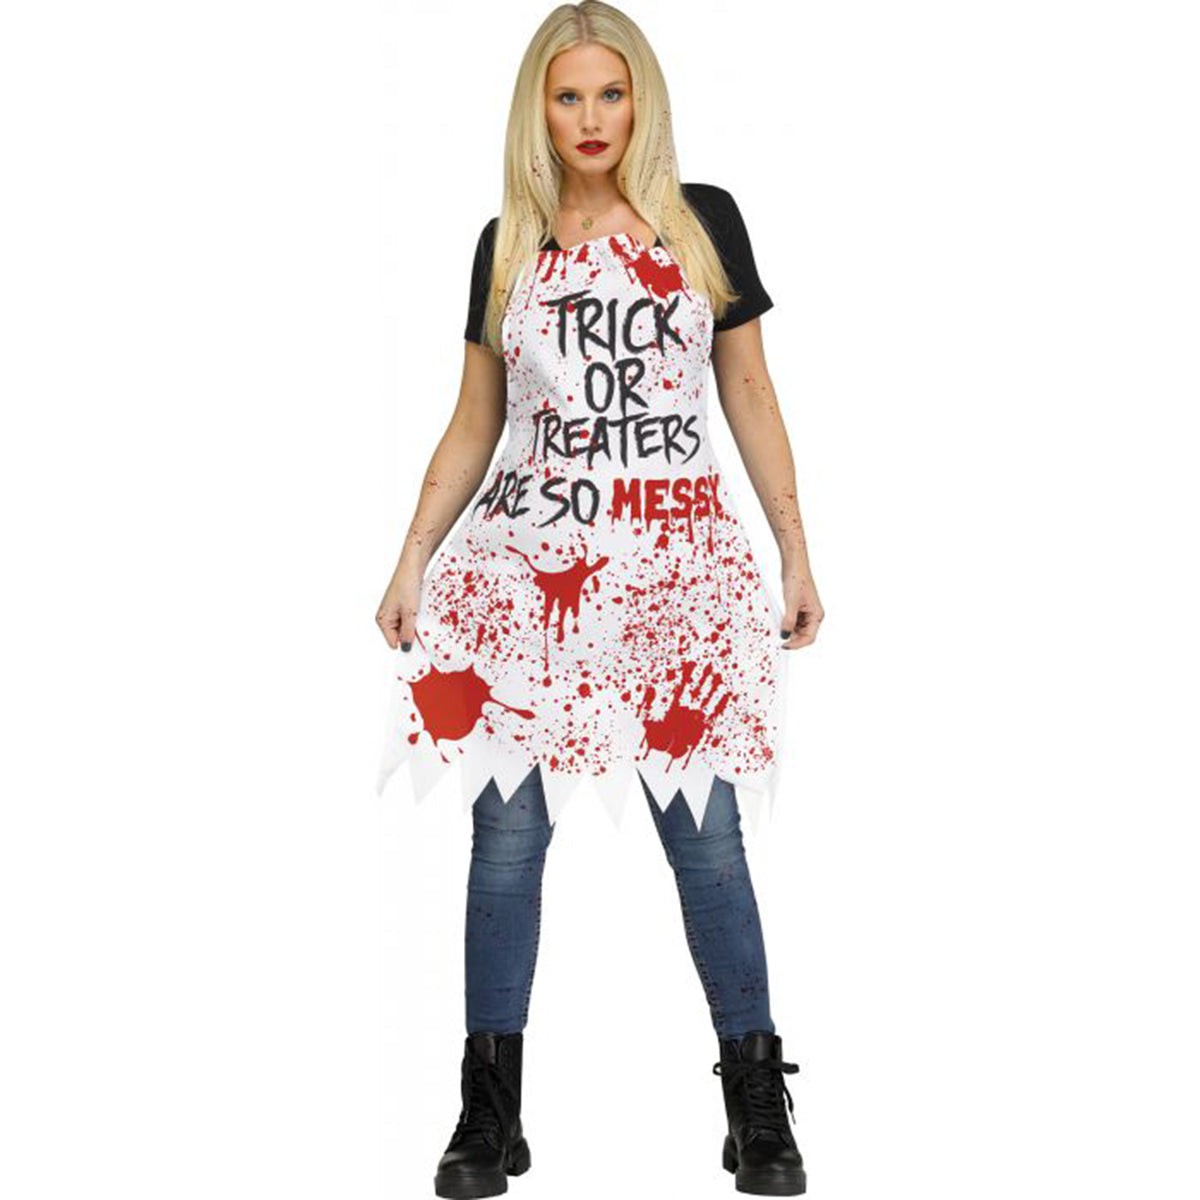 FUN WORLD Costume Accessories Horror Apron for Adults 071765136488